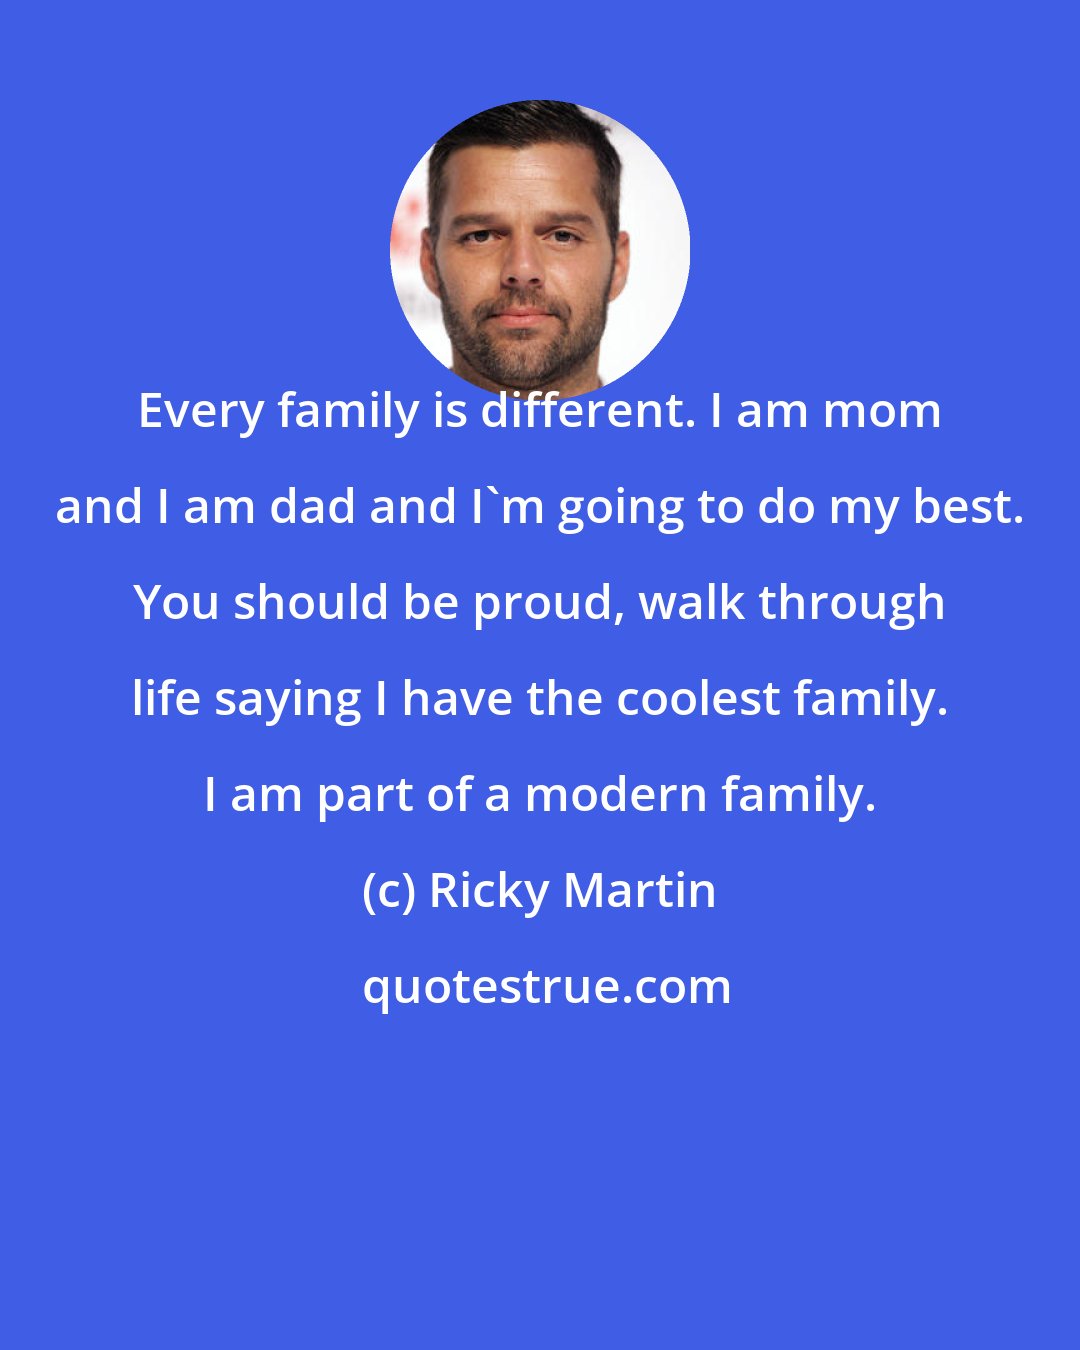 Ricky Martin: Every family is different. I am mom and I am dad and I'm going to do my best. You should be proud, walk through life saying I have the coolest family. I am part of a modern family.